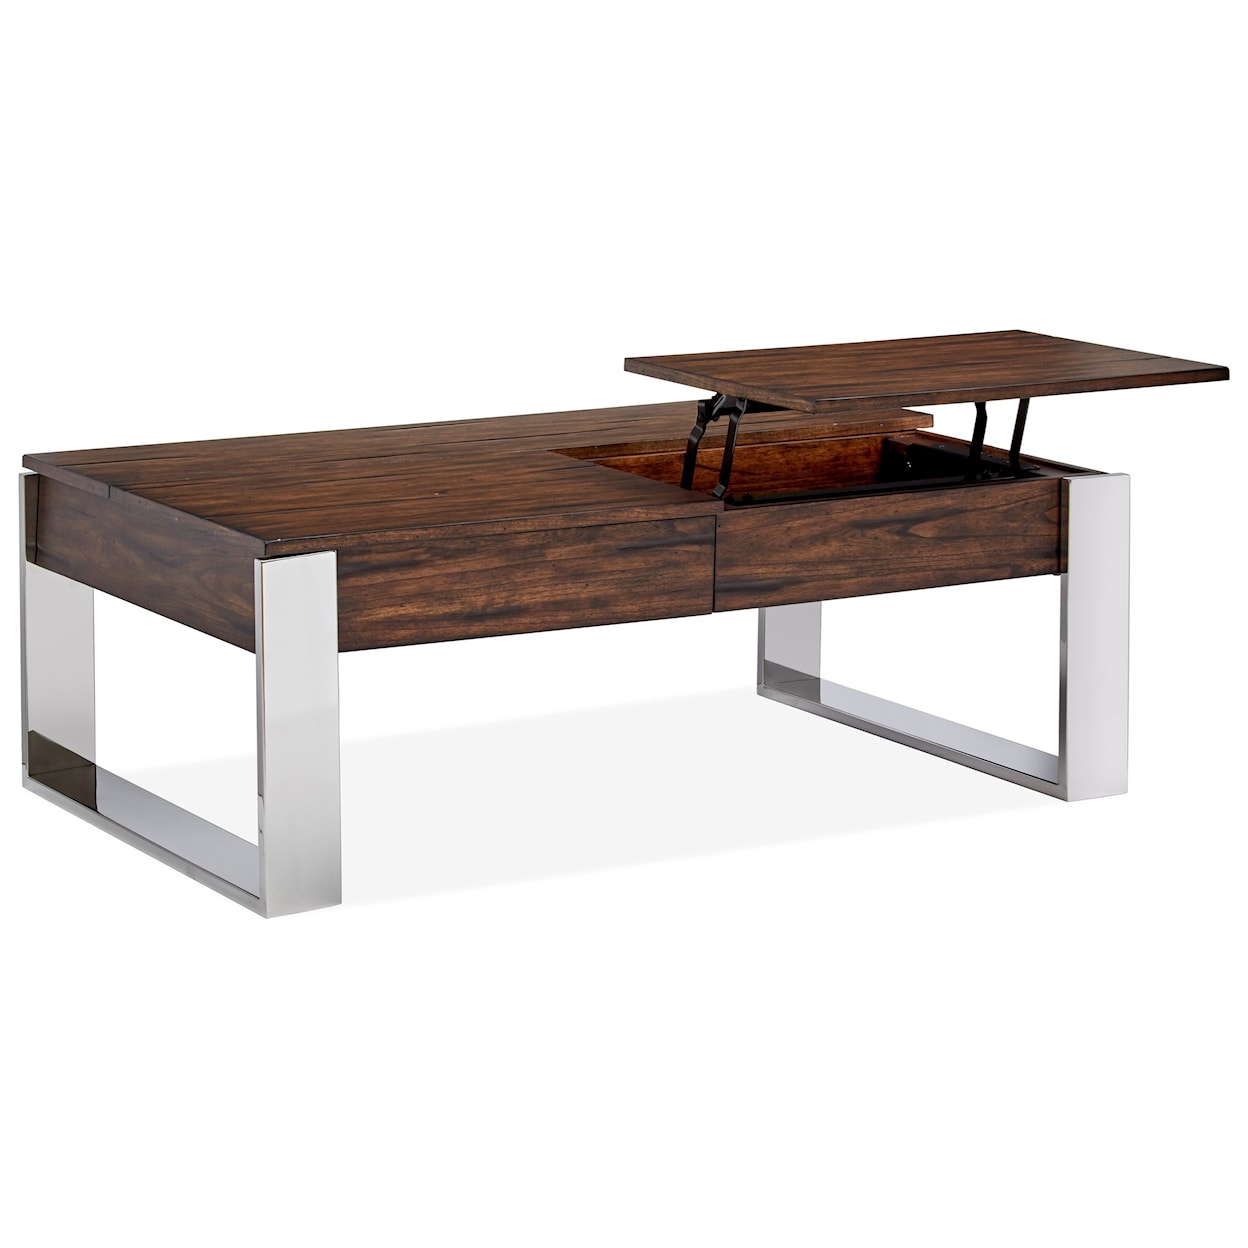 Magnussen Home Duvall Storage Cocktail Table